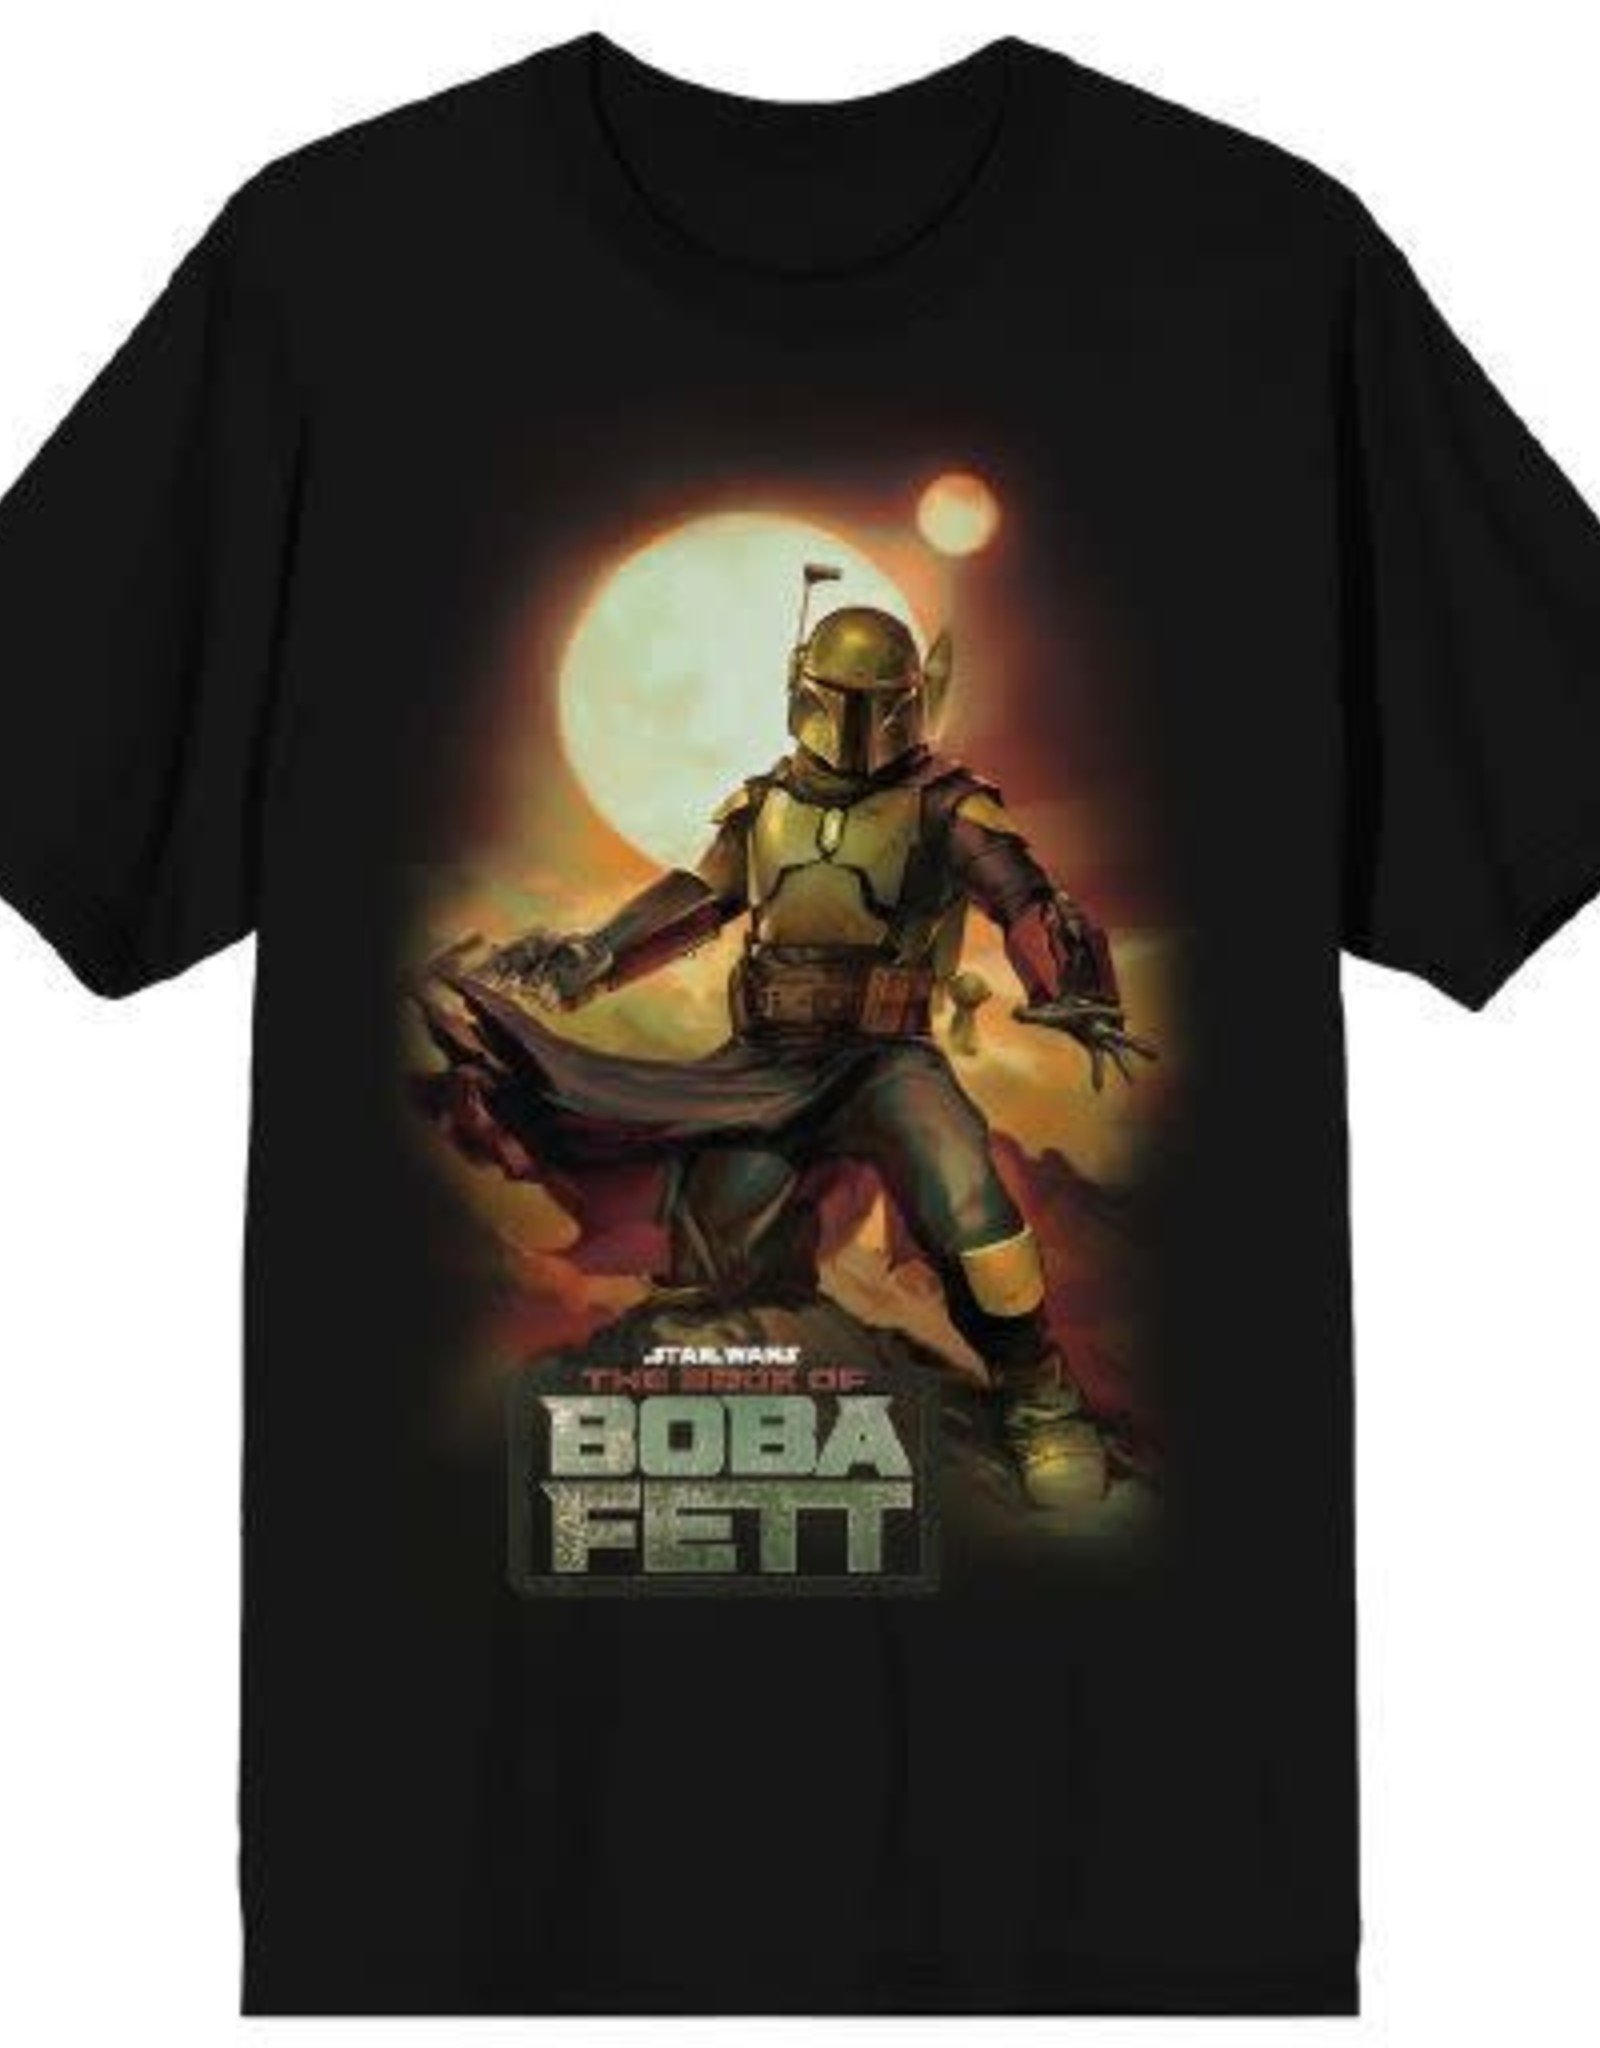 STAR WARS- Book of Boba Fett Character Tee  S